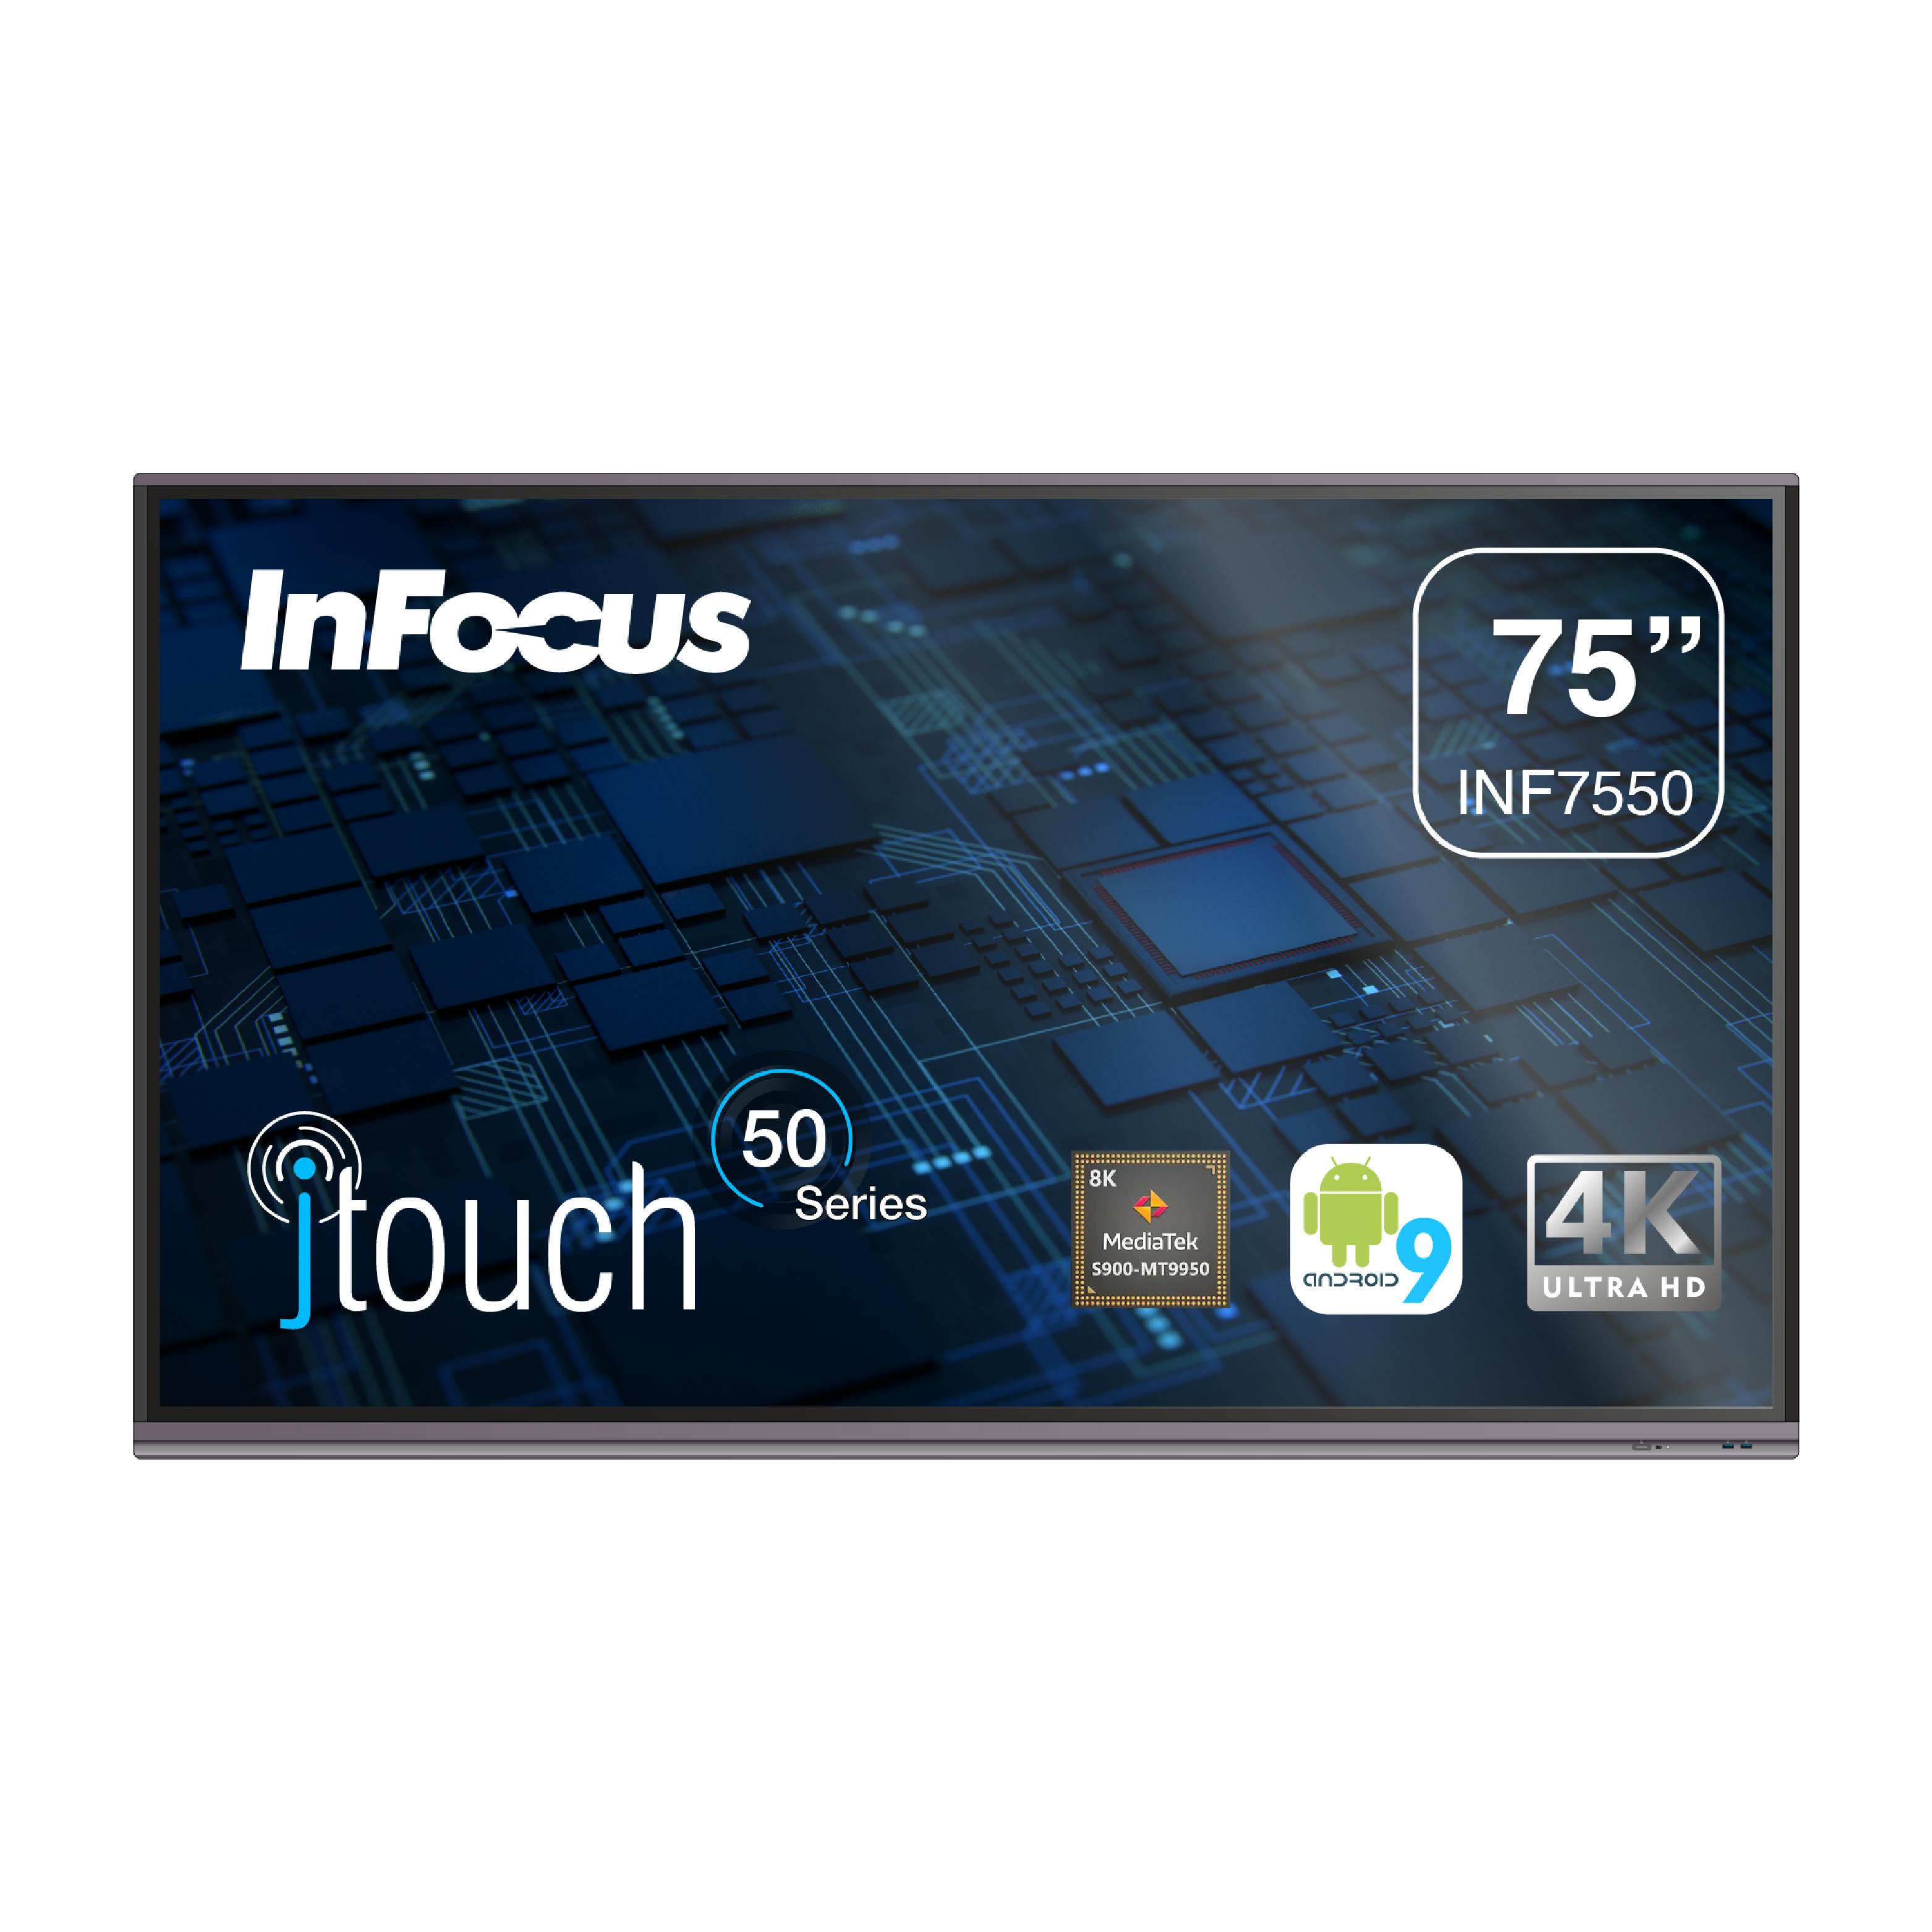 https://infocus.imgix.net/2022/04/JTouch-50-Series_INF7550_F_90-01.png?auto=compress%2Cformat&ixlib=php-3.3.1